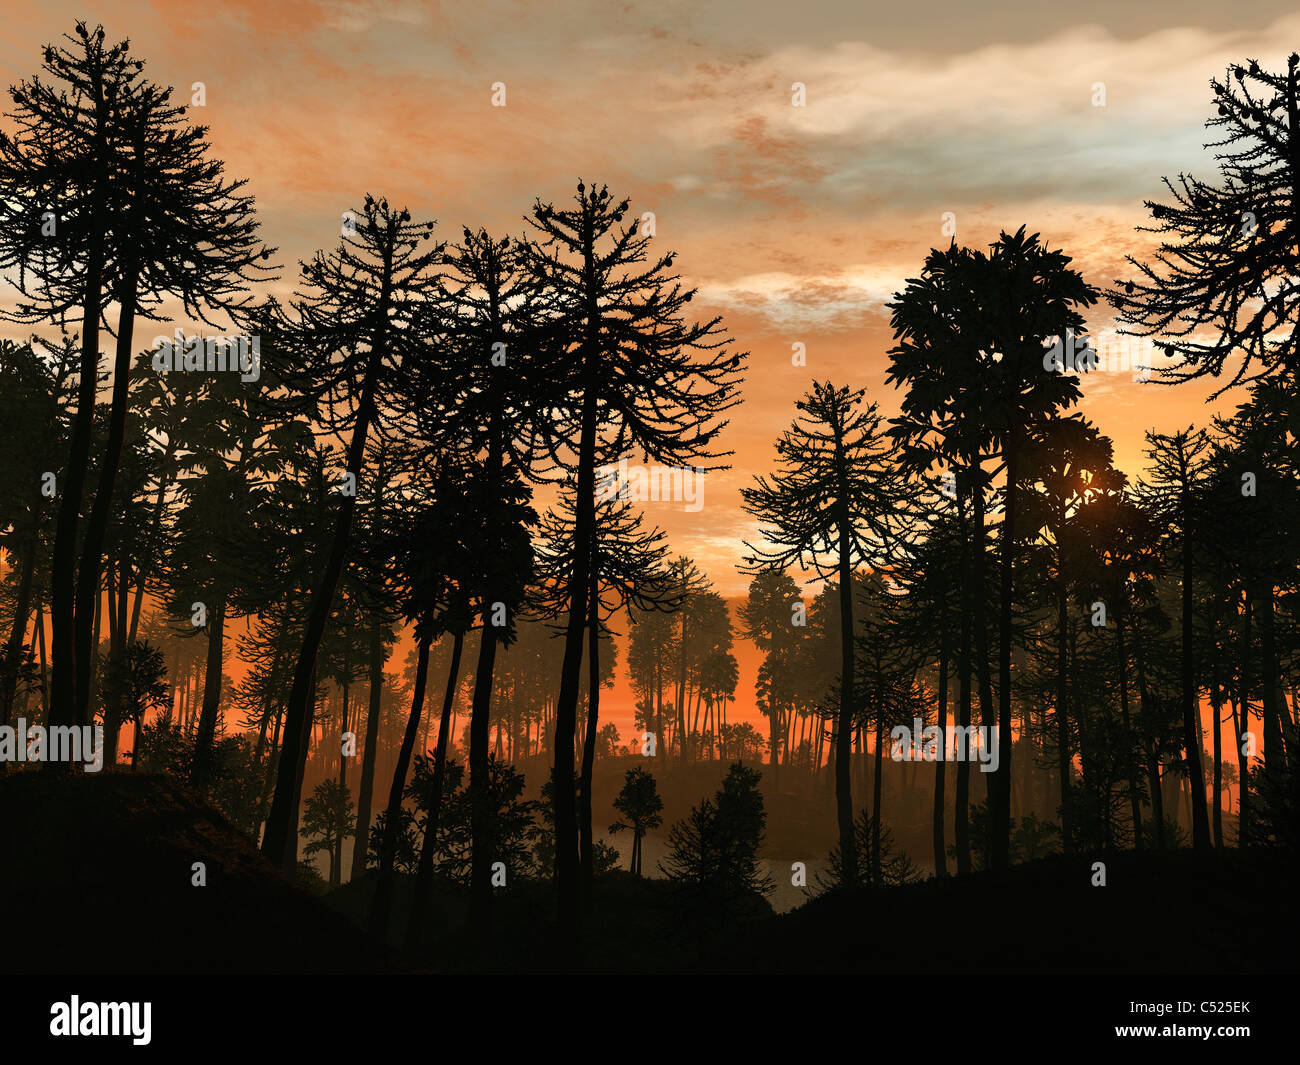 A forest of Cordaites and Araucaria silhouetted against a colorful sunset. Stock Photo